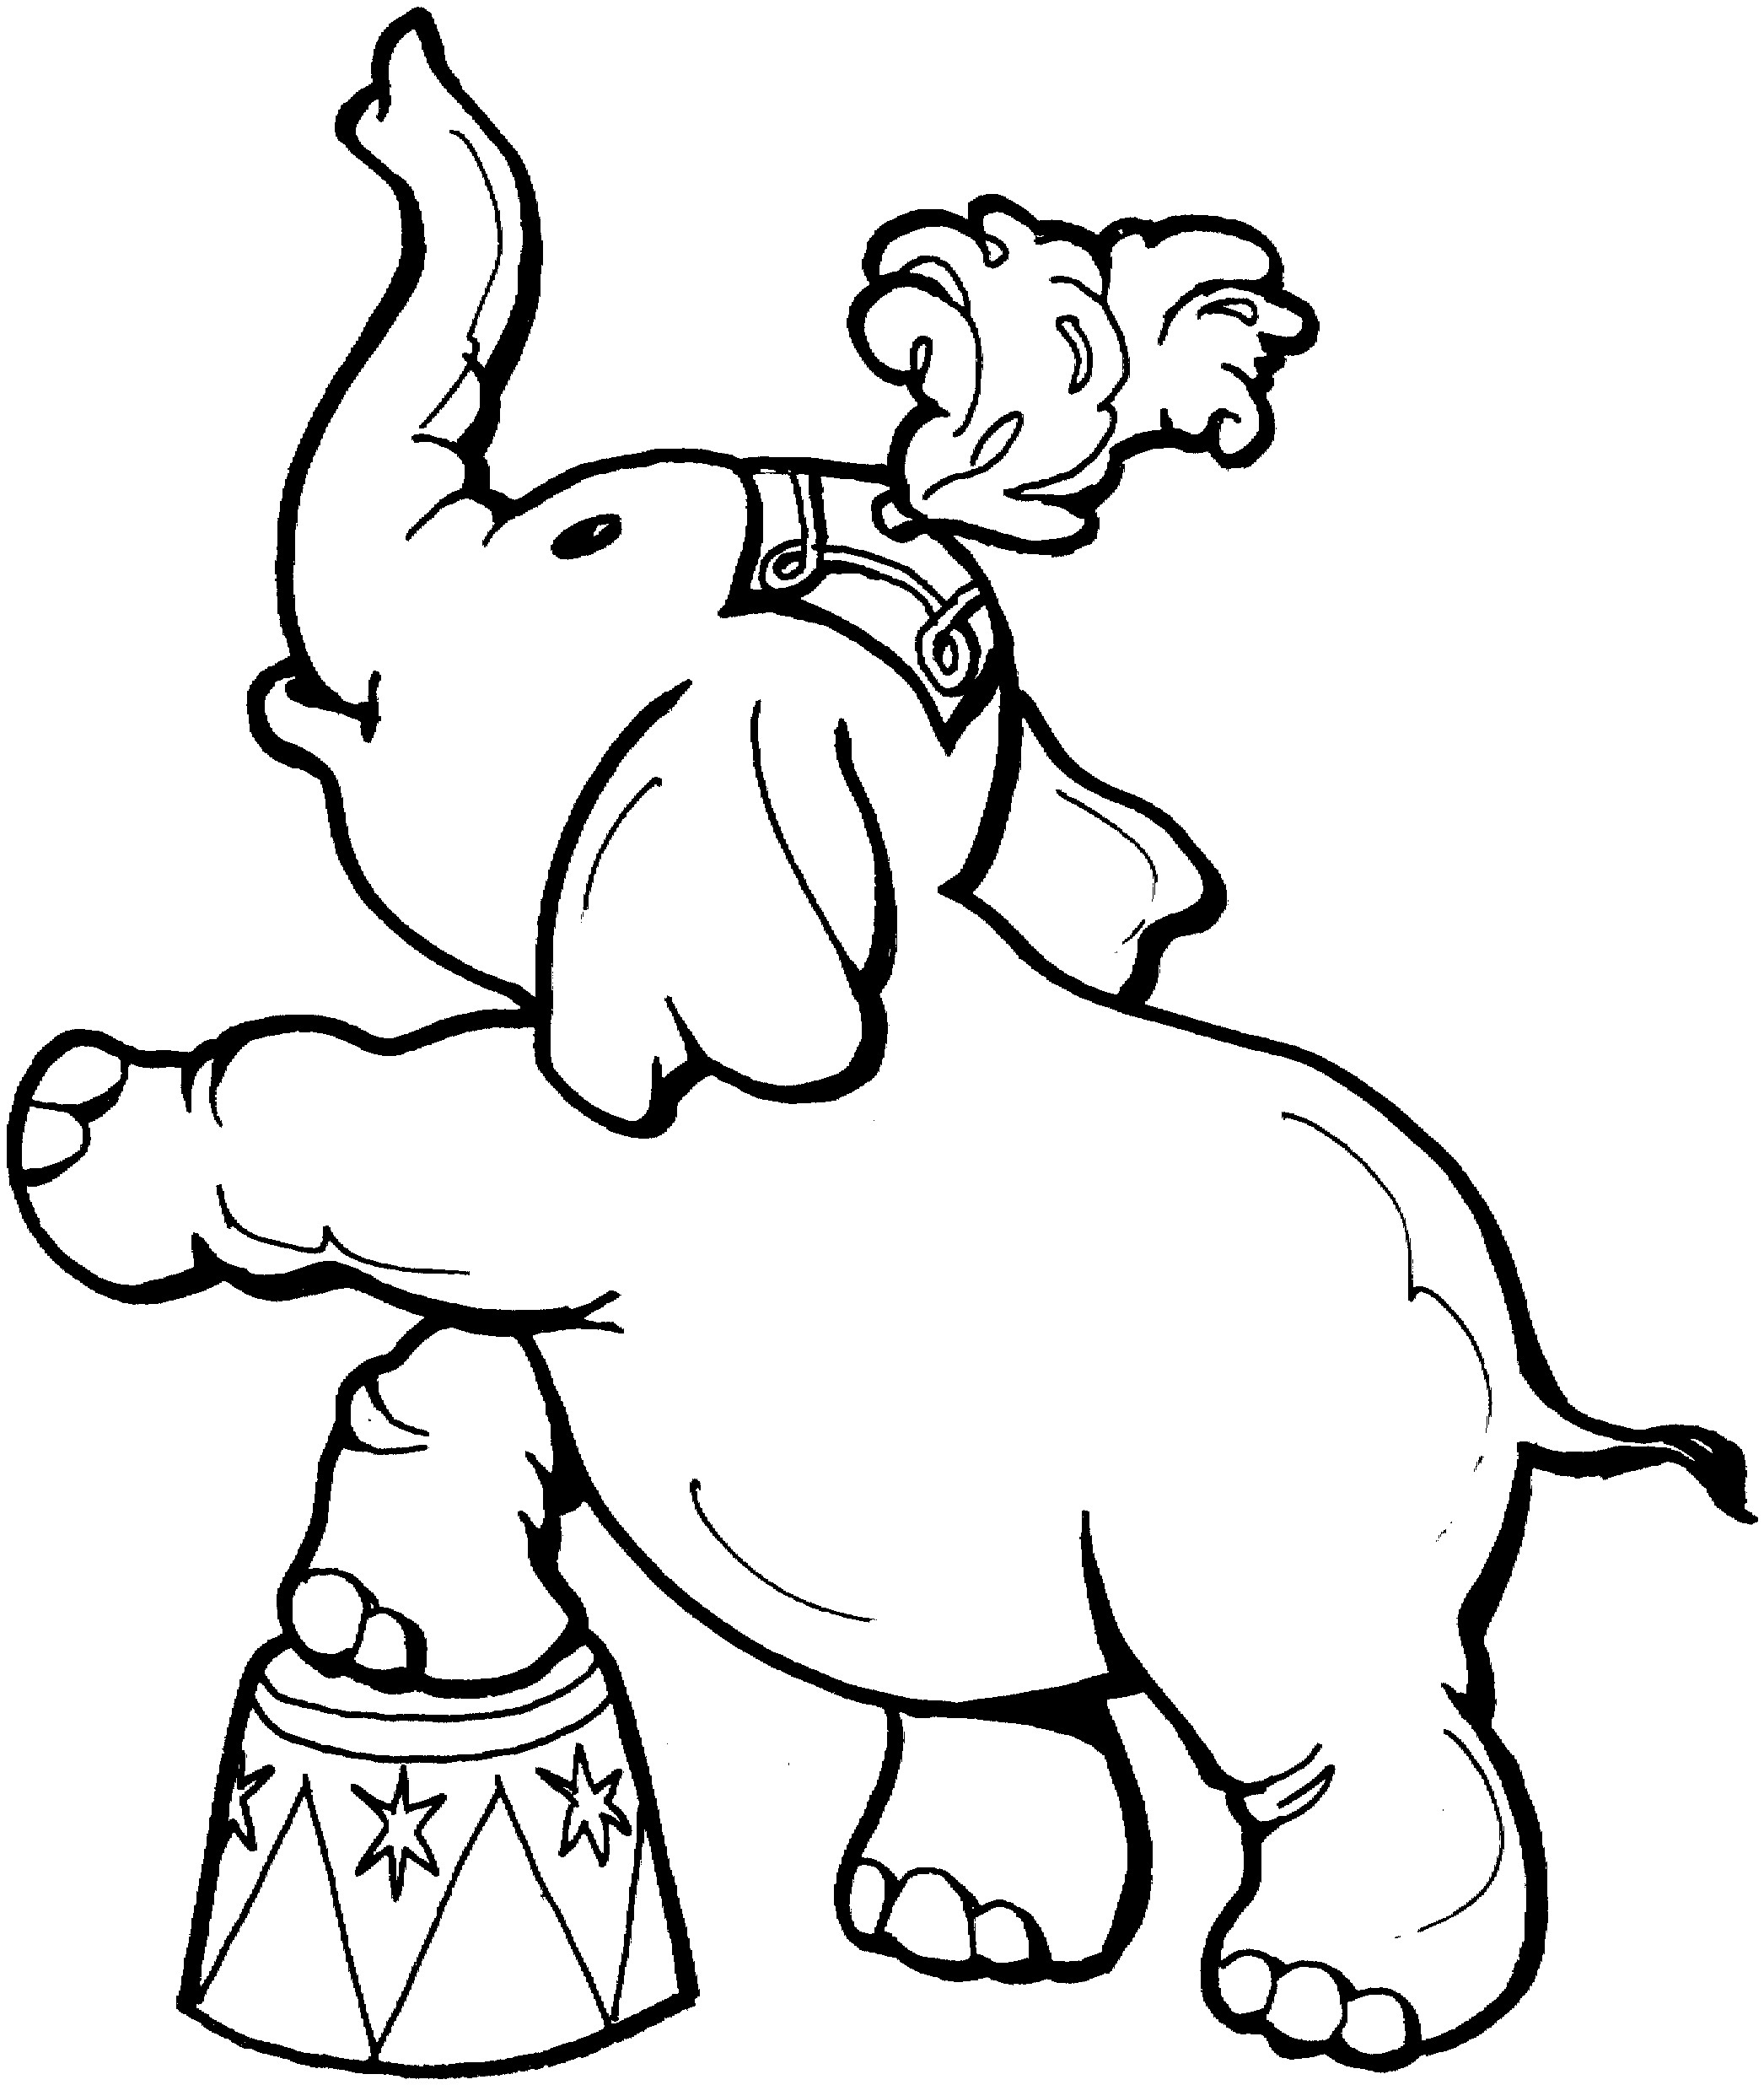 Elephant Coloring Sheet
 Free Elephant Coloring Pages